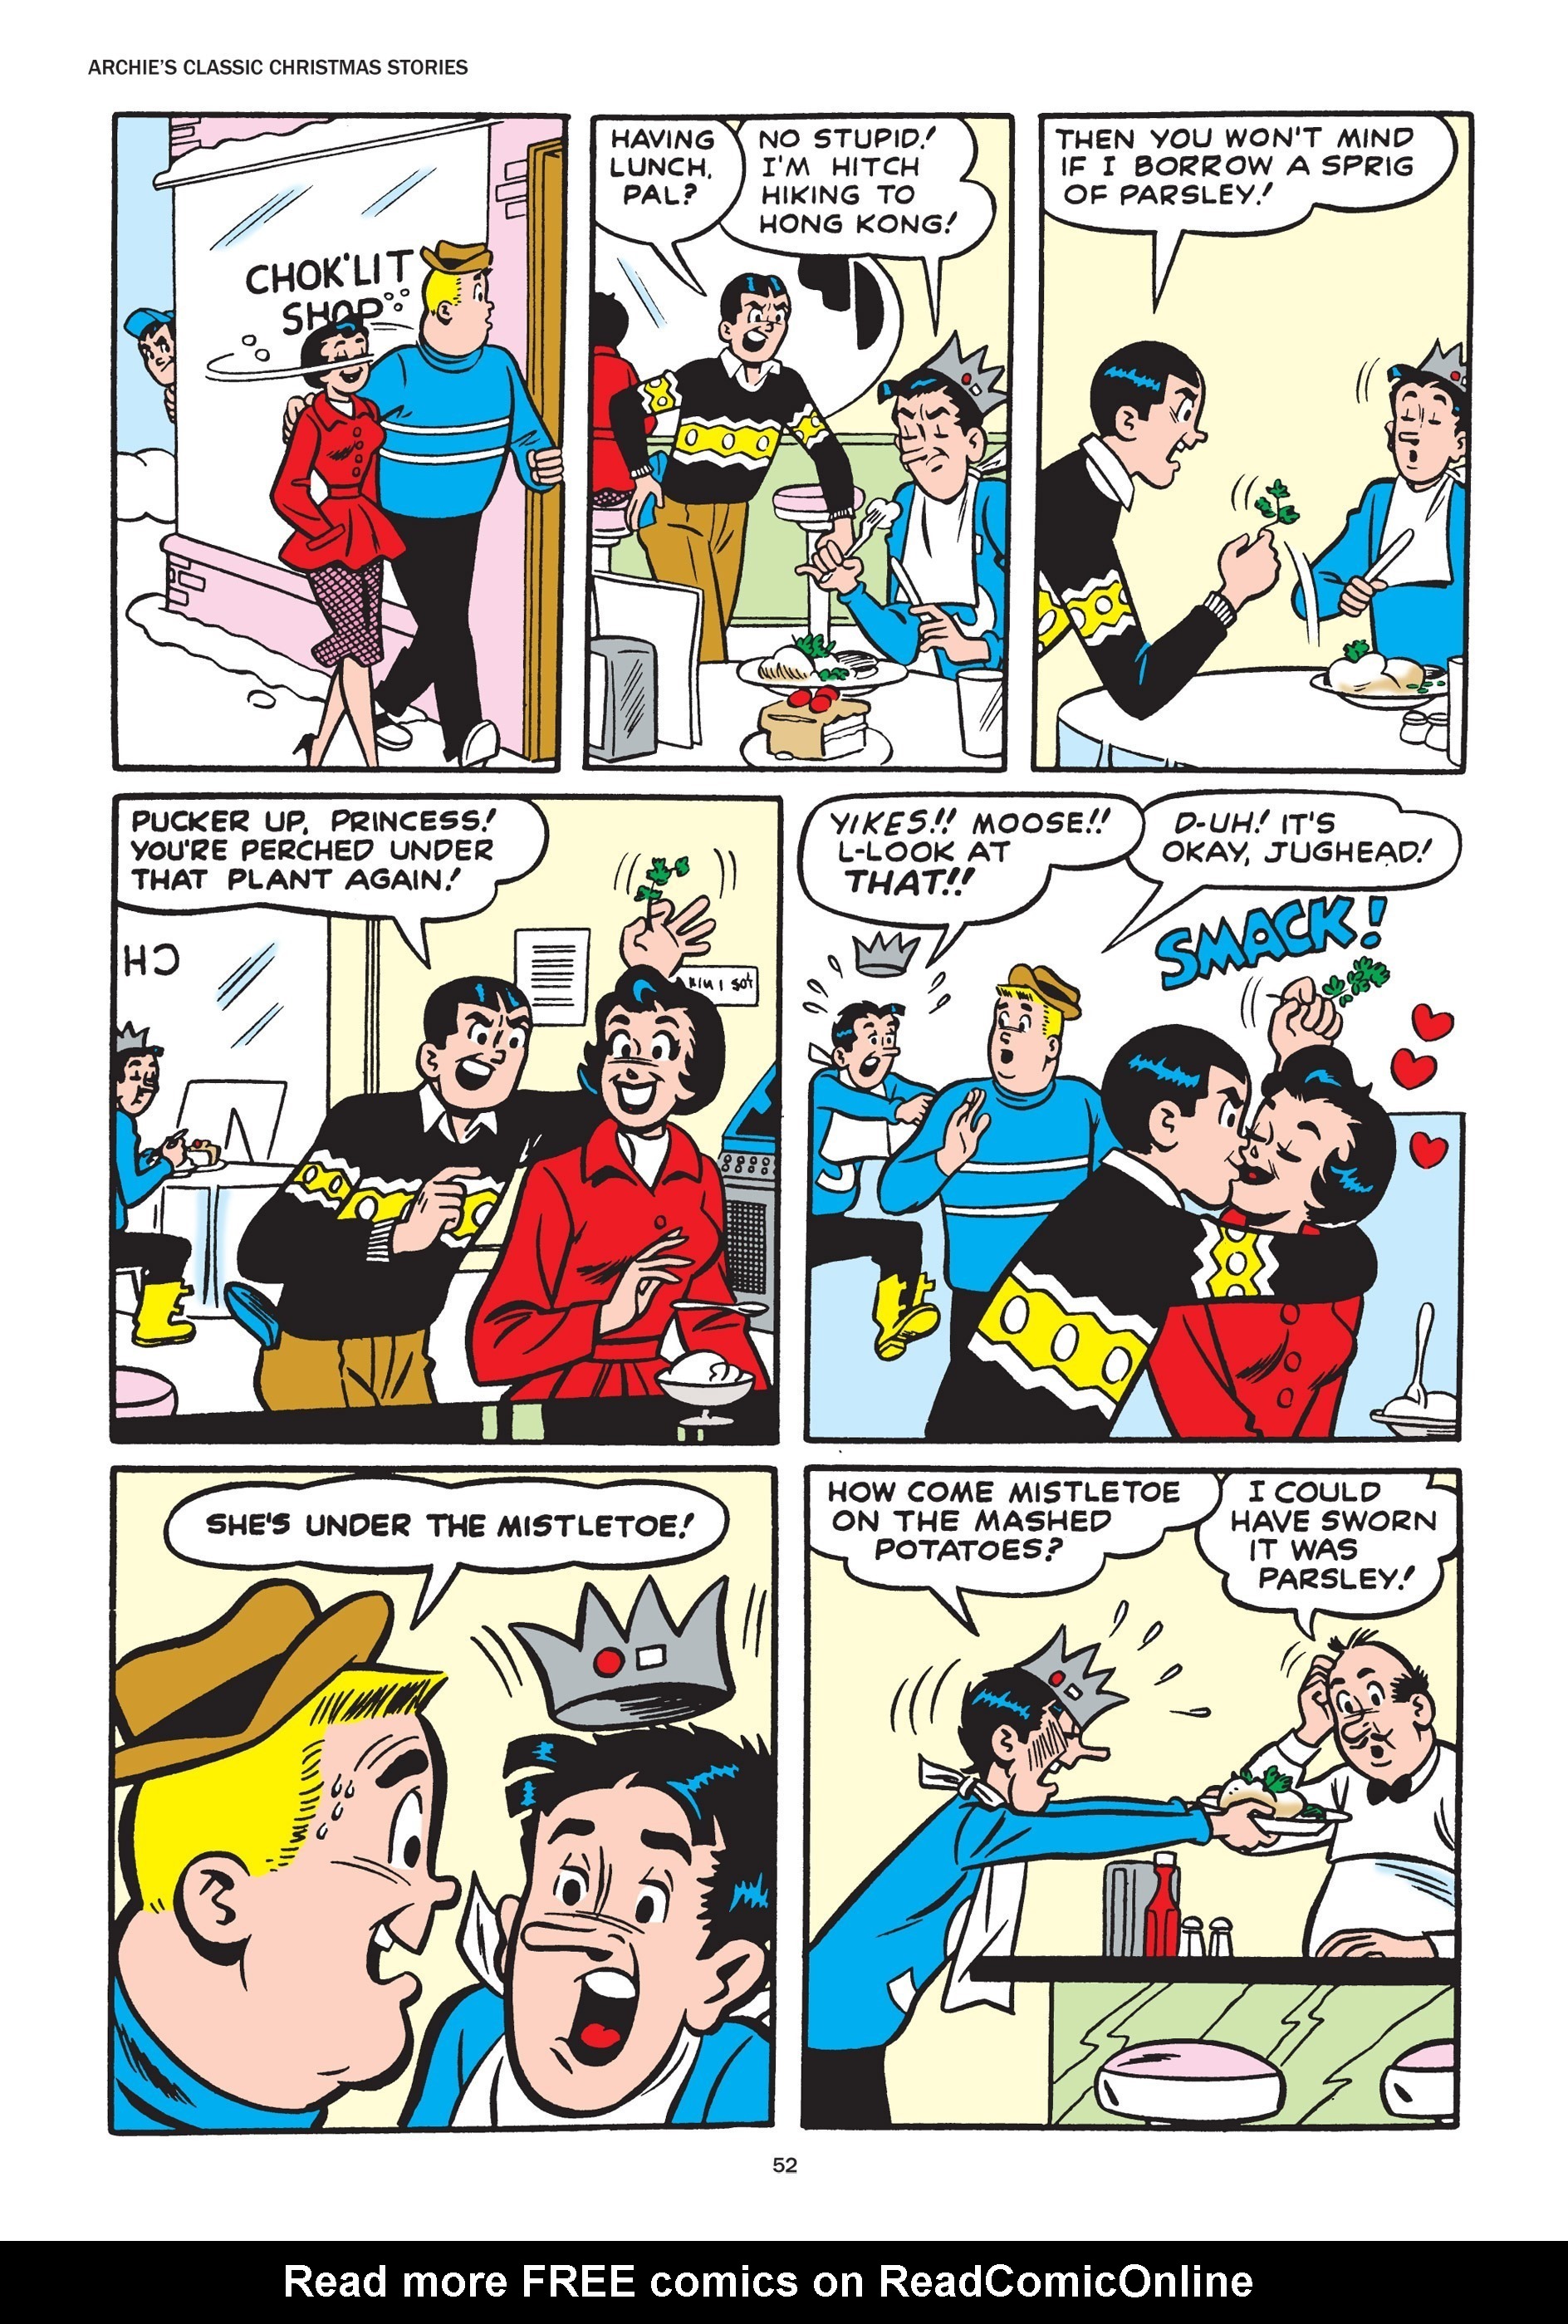 Read online Archie's Classic Christmas Stories comic -  Issue # TPB - 53